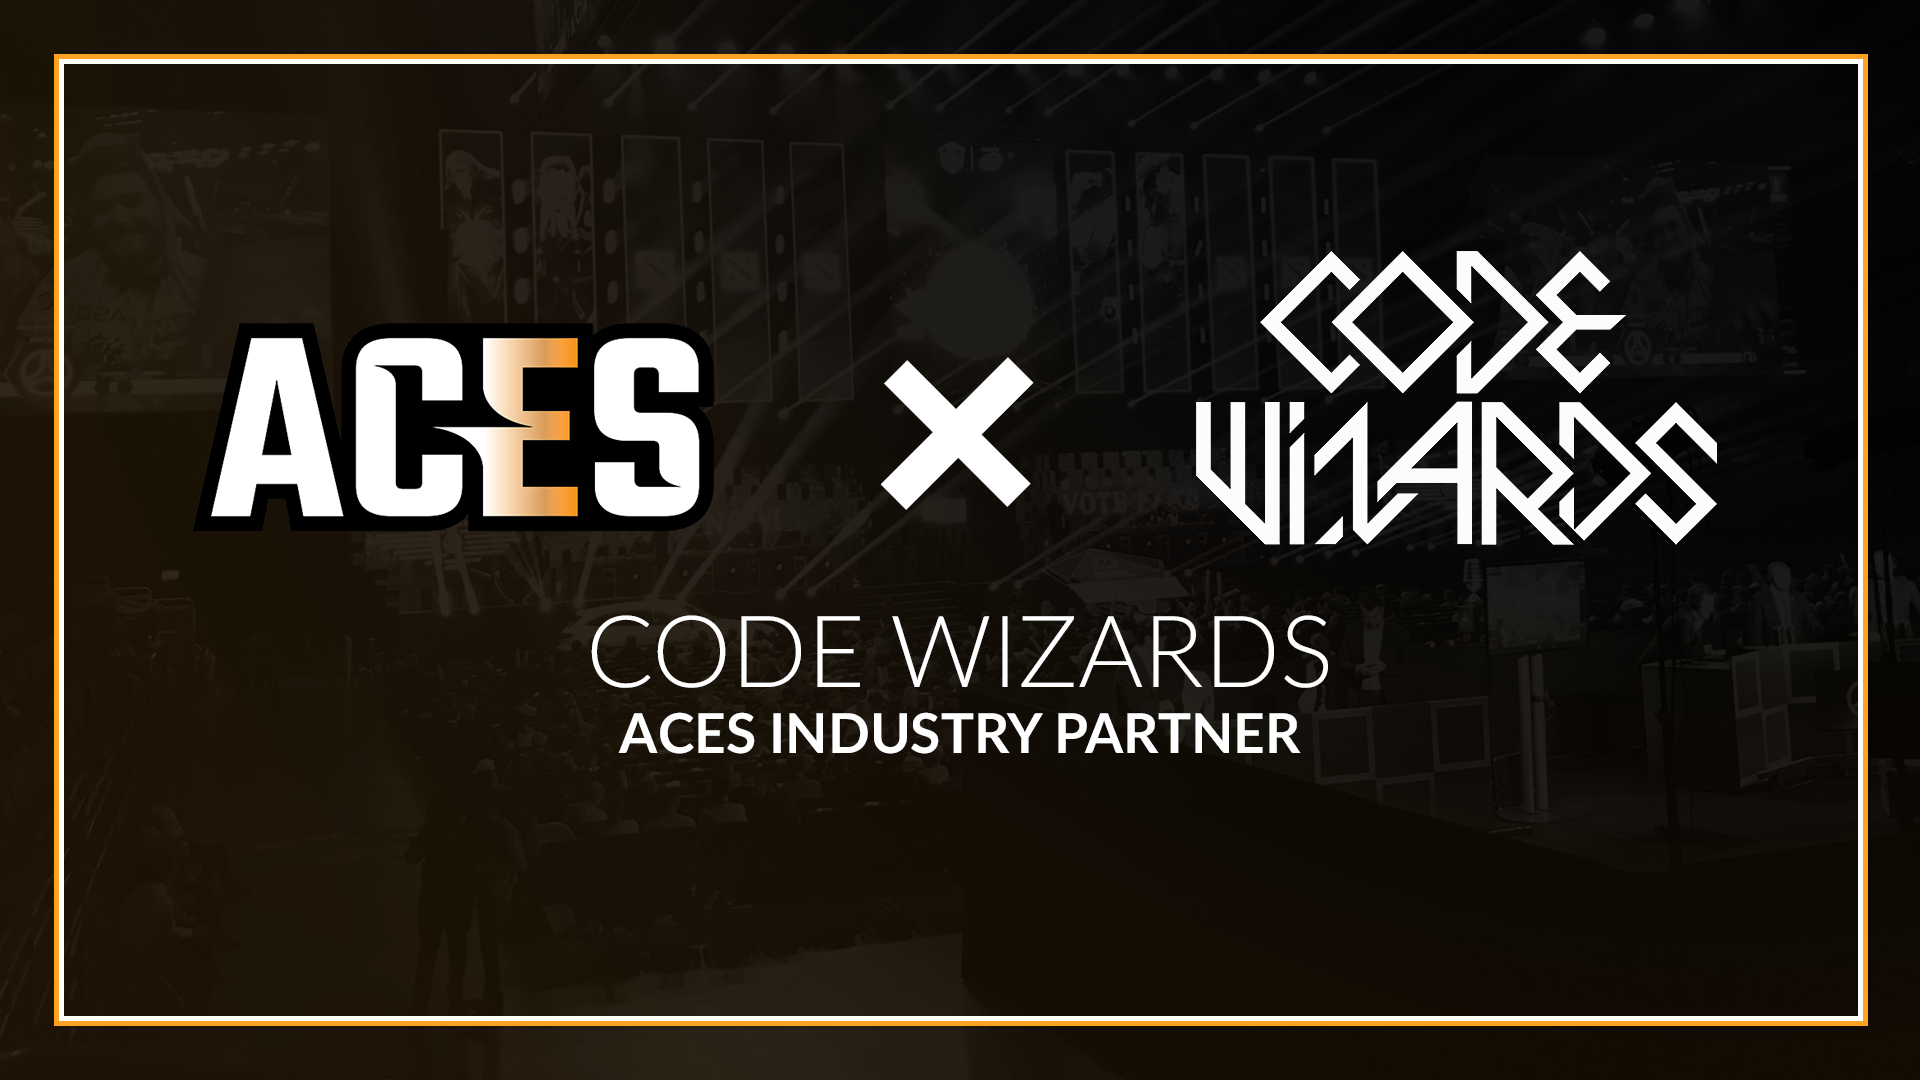 aces announces partnership with code wizards for academic and industry esports collaboration